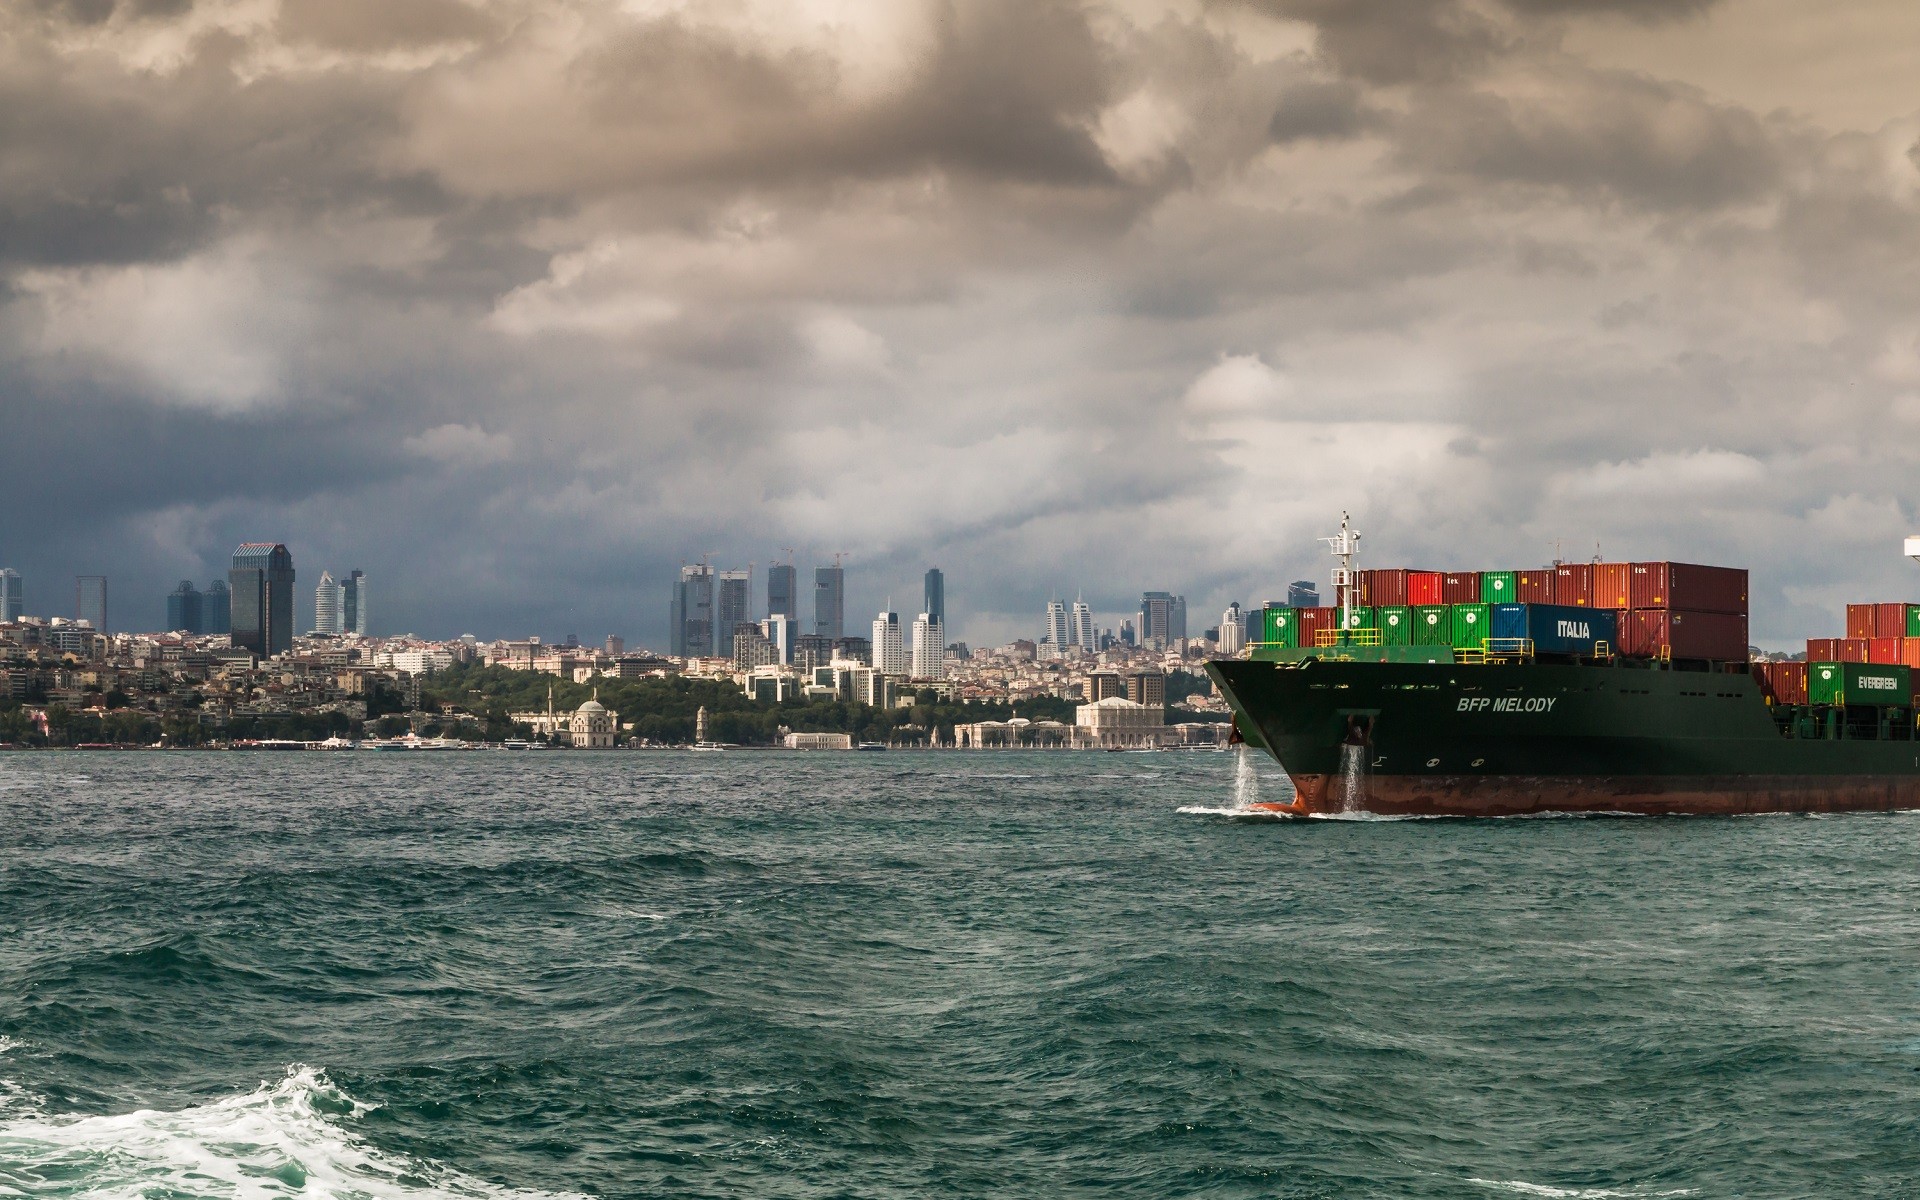 Turkey, Istanbul, City, Cityscape, Ship, Container ship, Sea, Clouds, Waves, Overcast Wallpaper